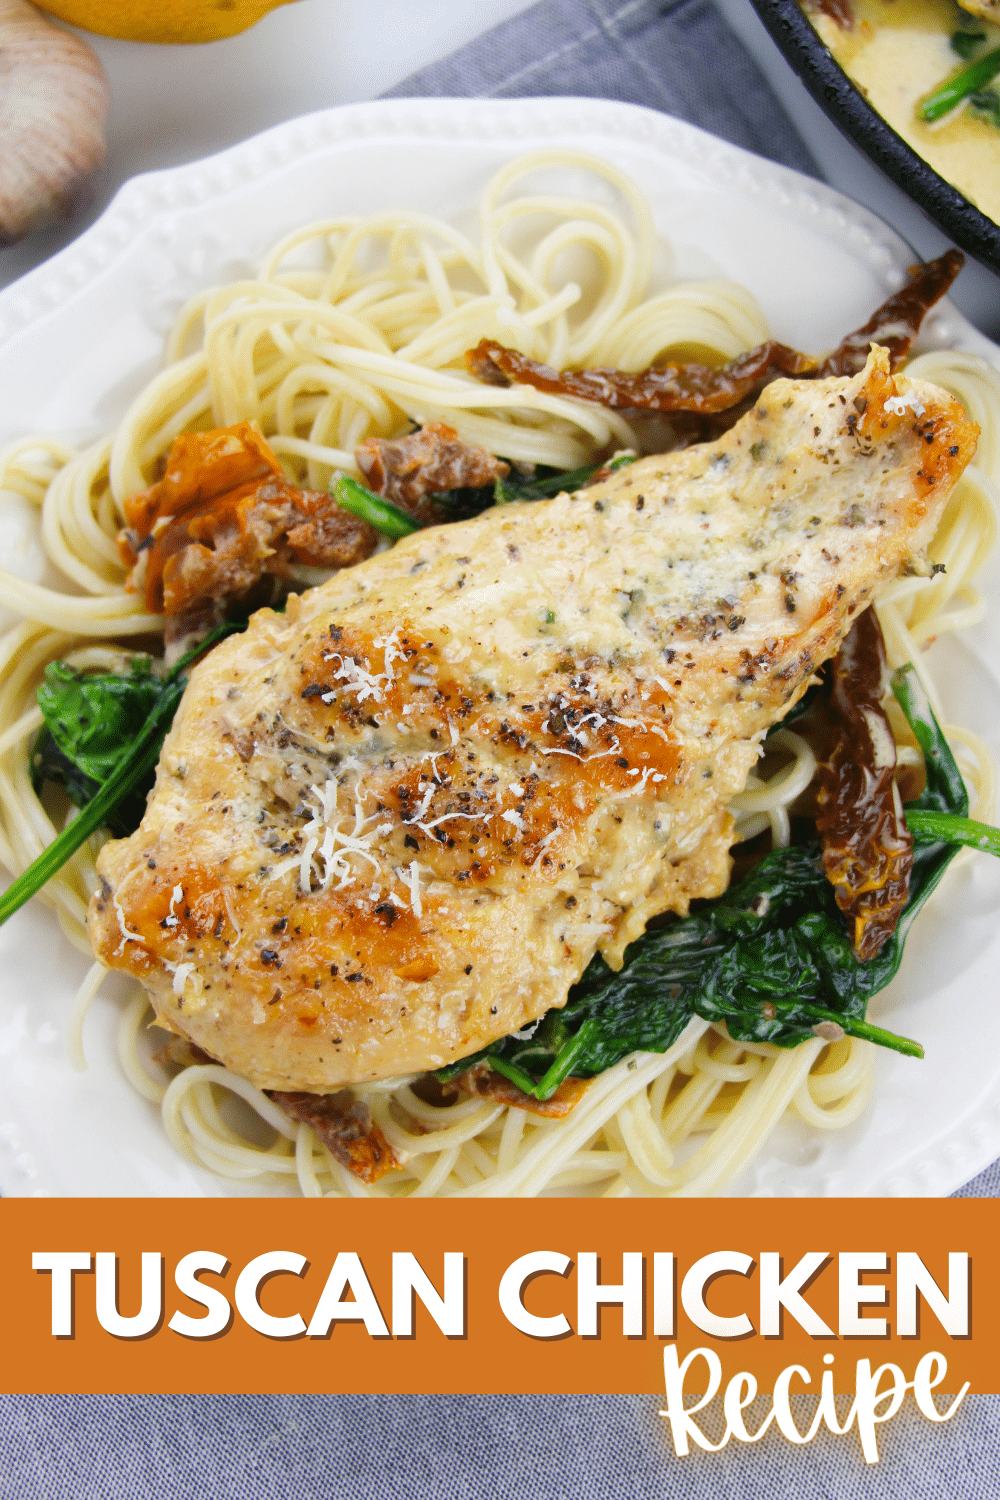 This Tuscan Chicken Recipe is one of the best meals when you want to make something quick and easy yet still delicious and nutritious! #tuscanchickenrecipe #creamytuscanchicken #creamytuscanchickenrecipe #tuscanchicken #chickenrecipe via @wondermomwannab